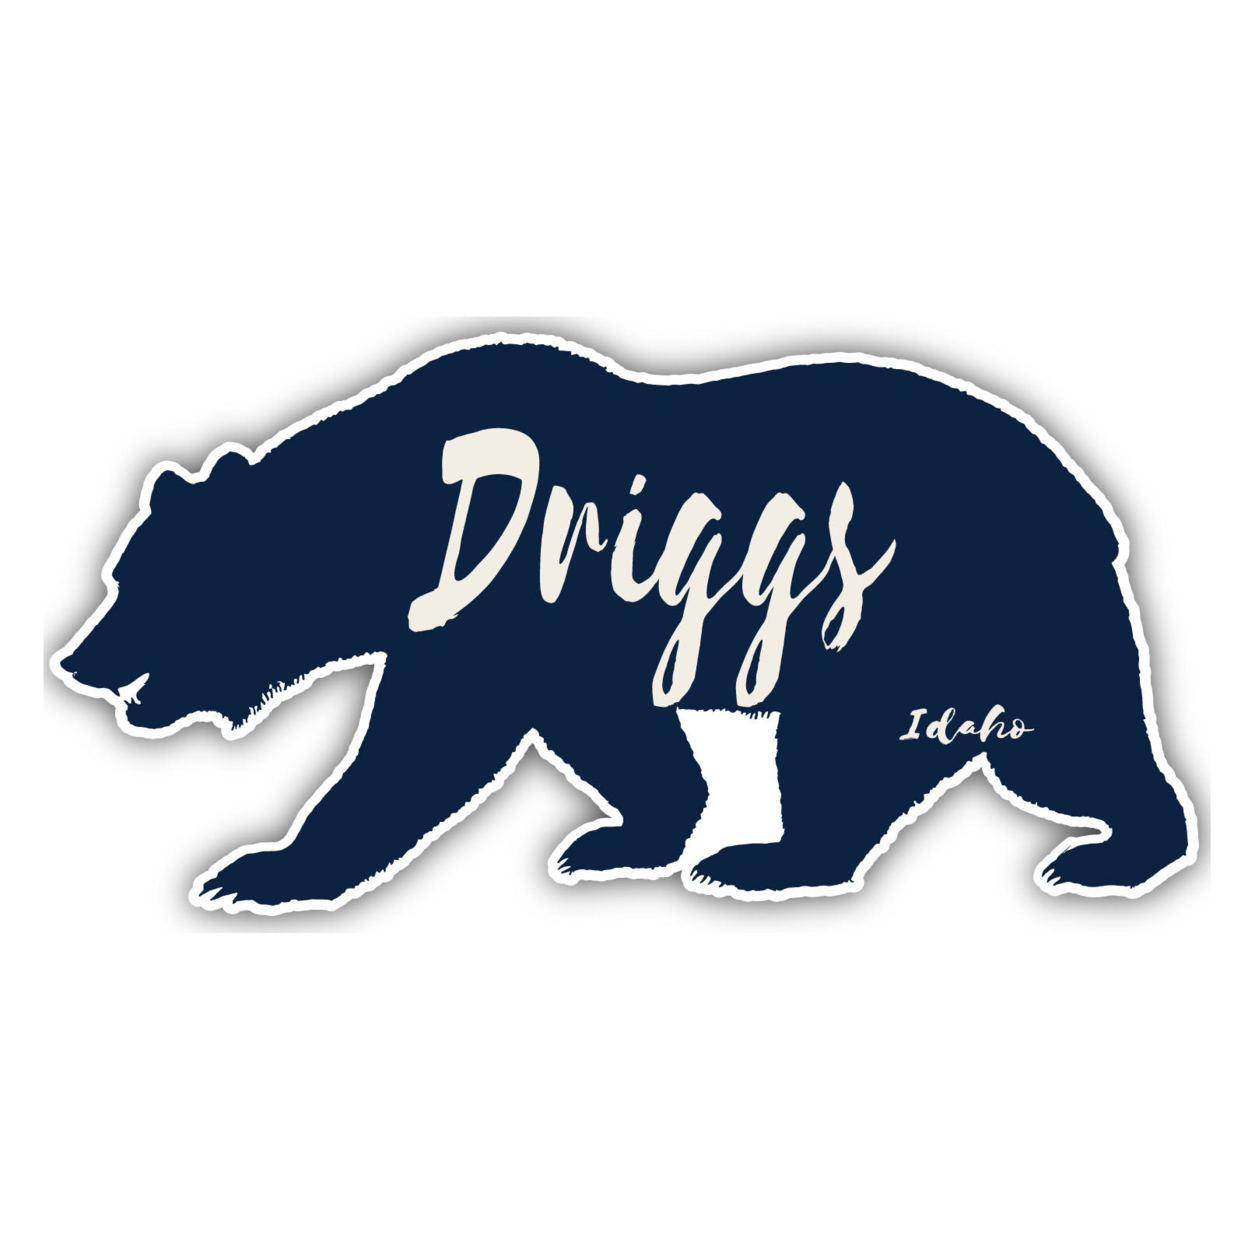 Driggs Idaho Souvenir Decorative Stickers (Choose Theme And Size) - 4-Pack, 4-Inch, Bear